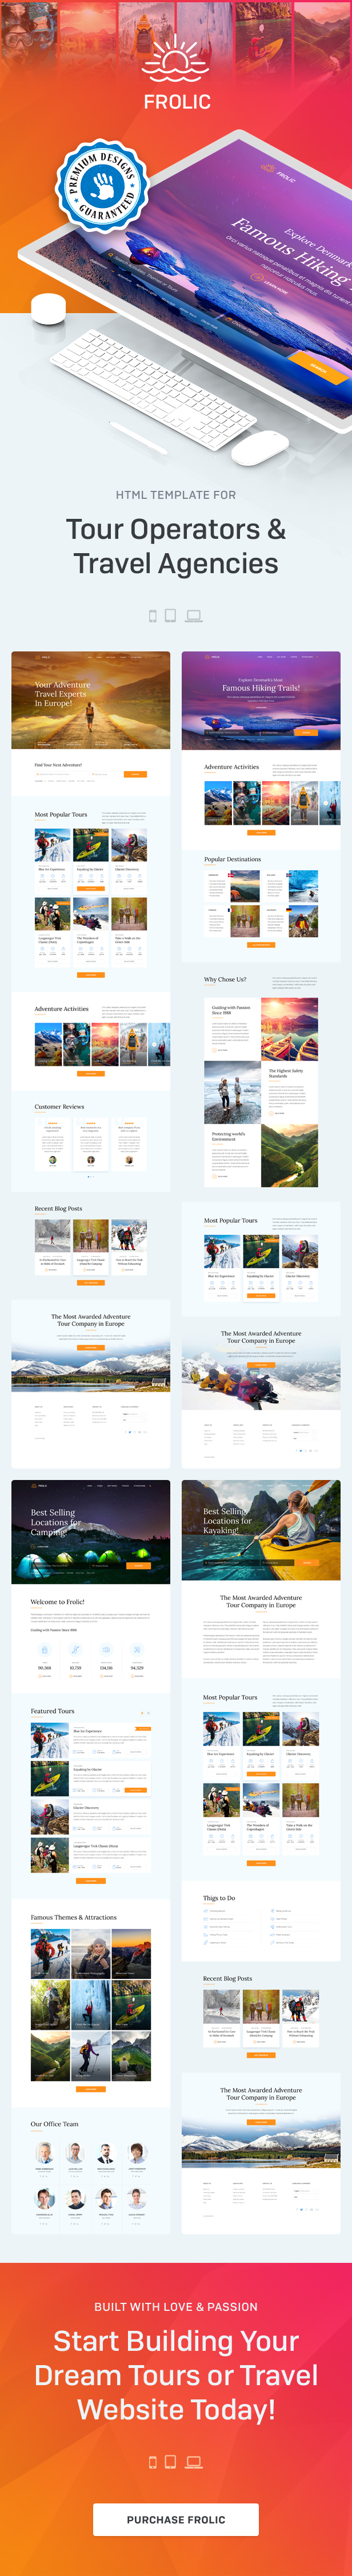 FROLIC - HTML Template for Tour Operators & Travel Agencies - 1